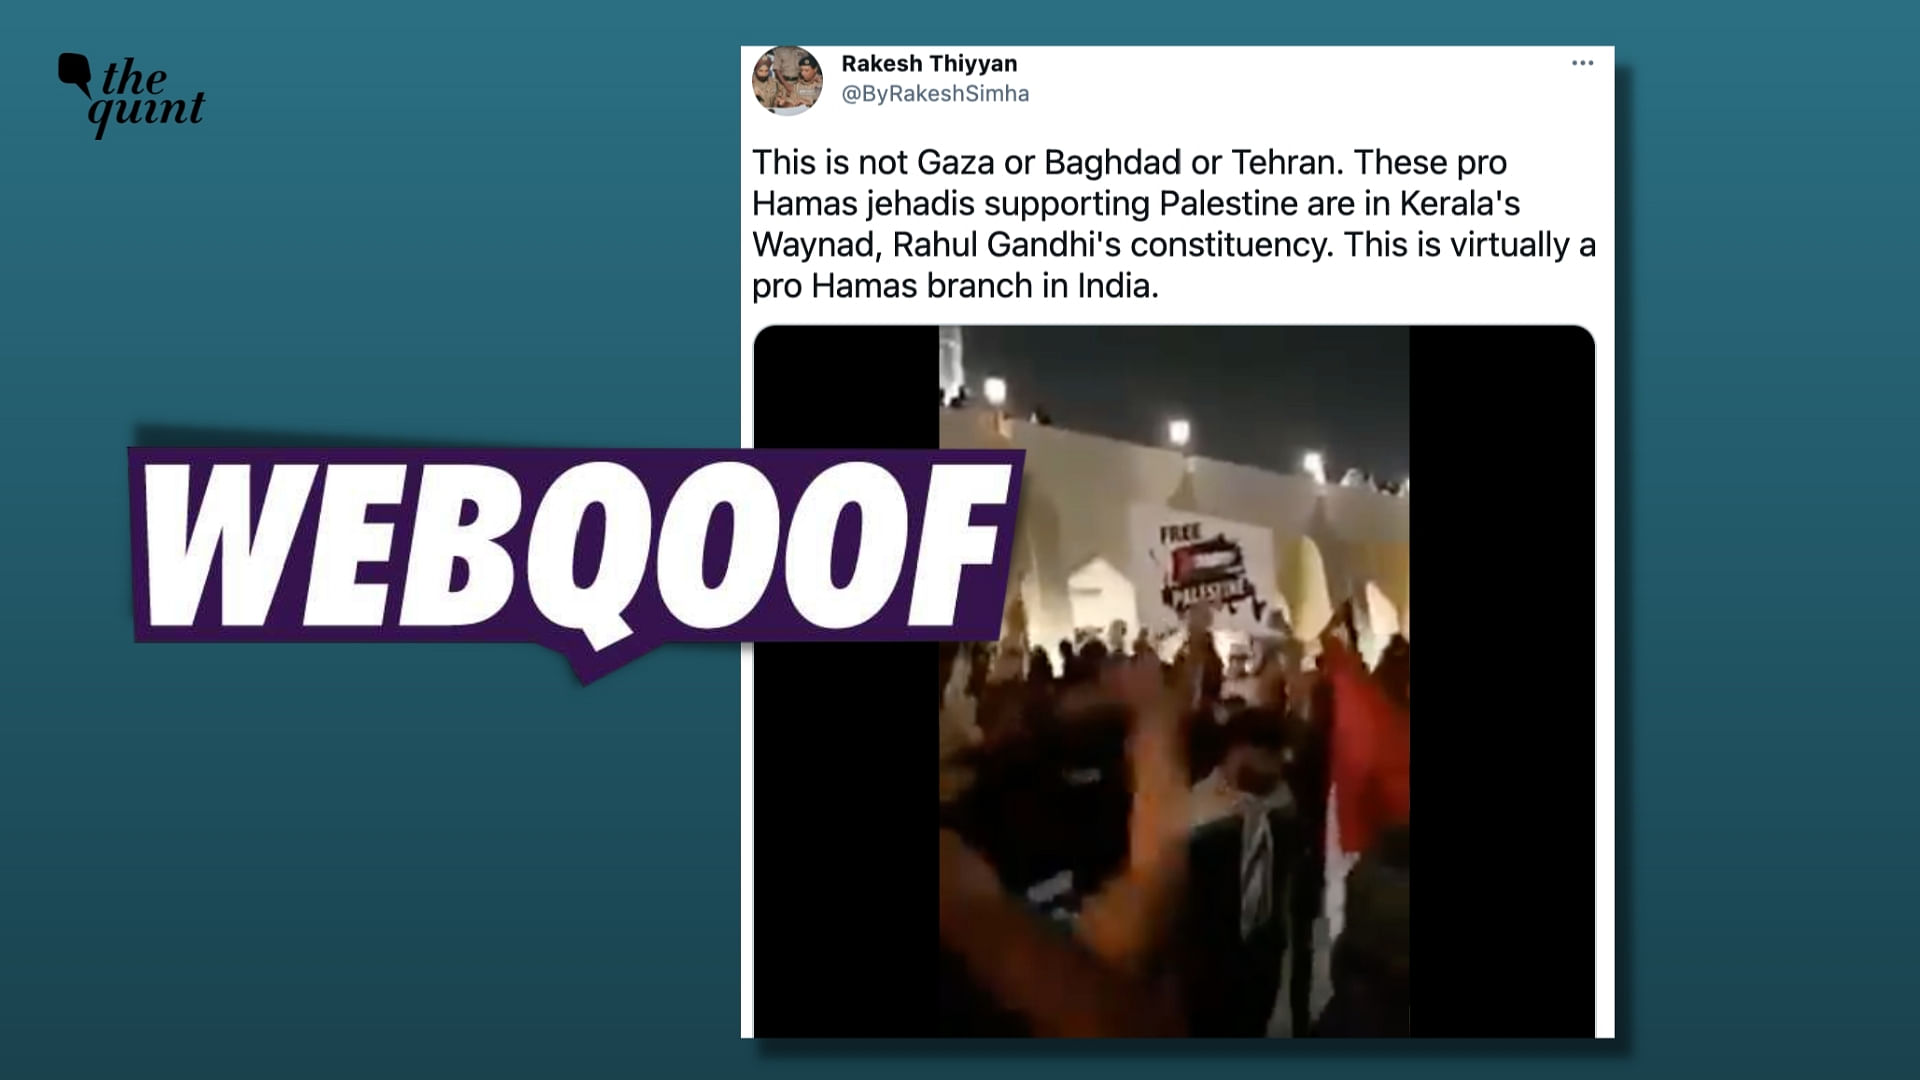 A video from Qatar was passed off with a false claim that people gathered in Kerala’s Wayanad to show support towards Palestine.